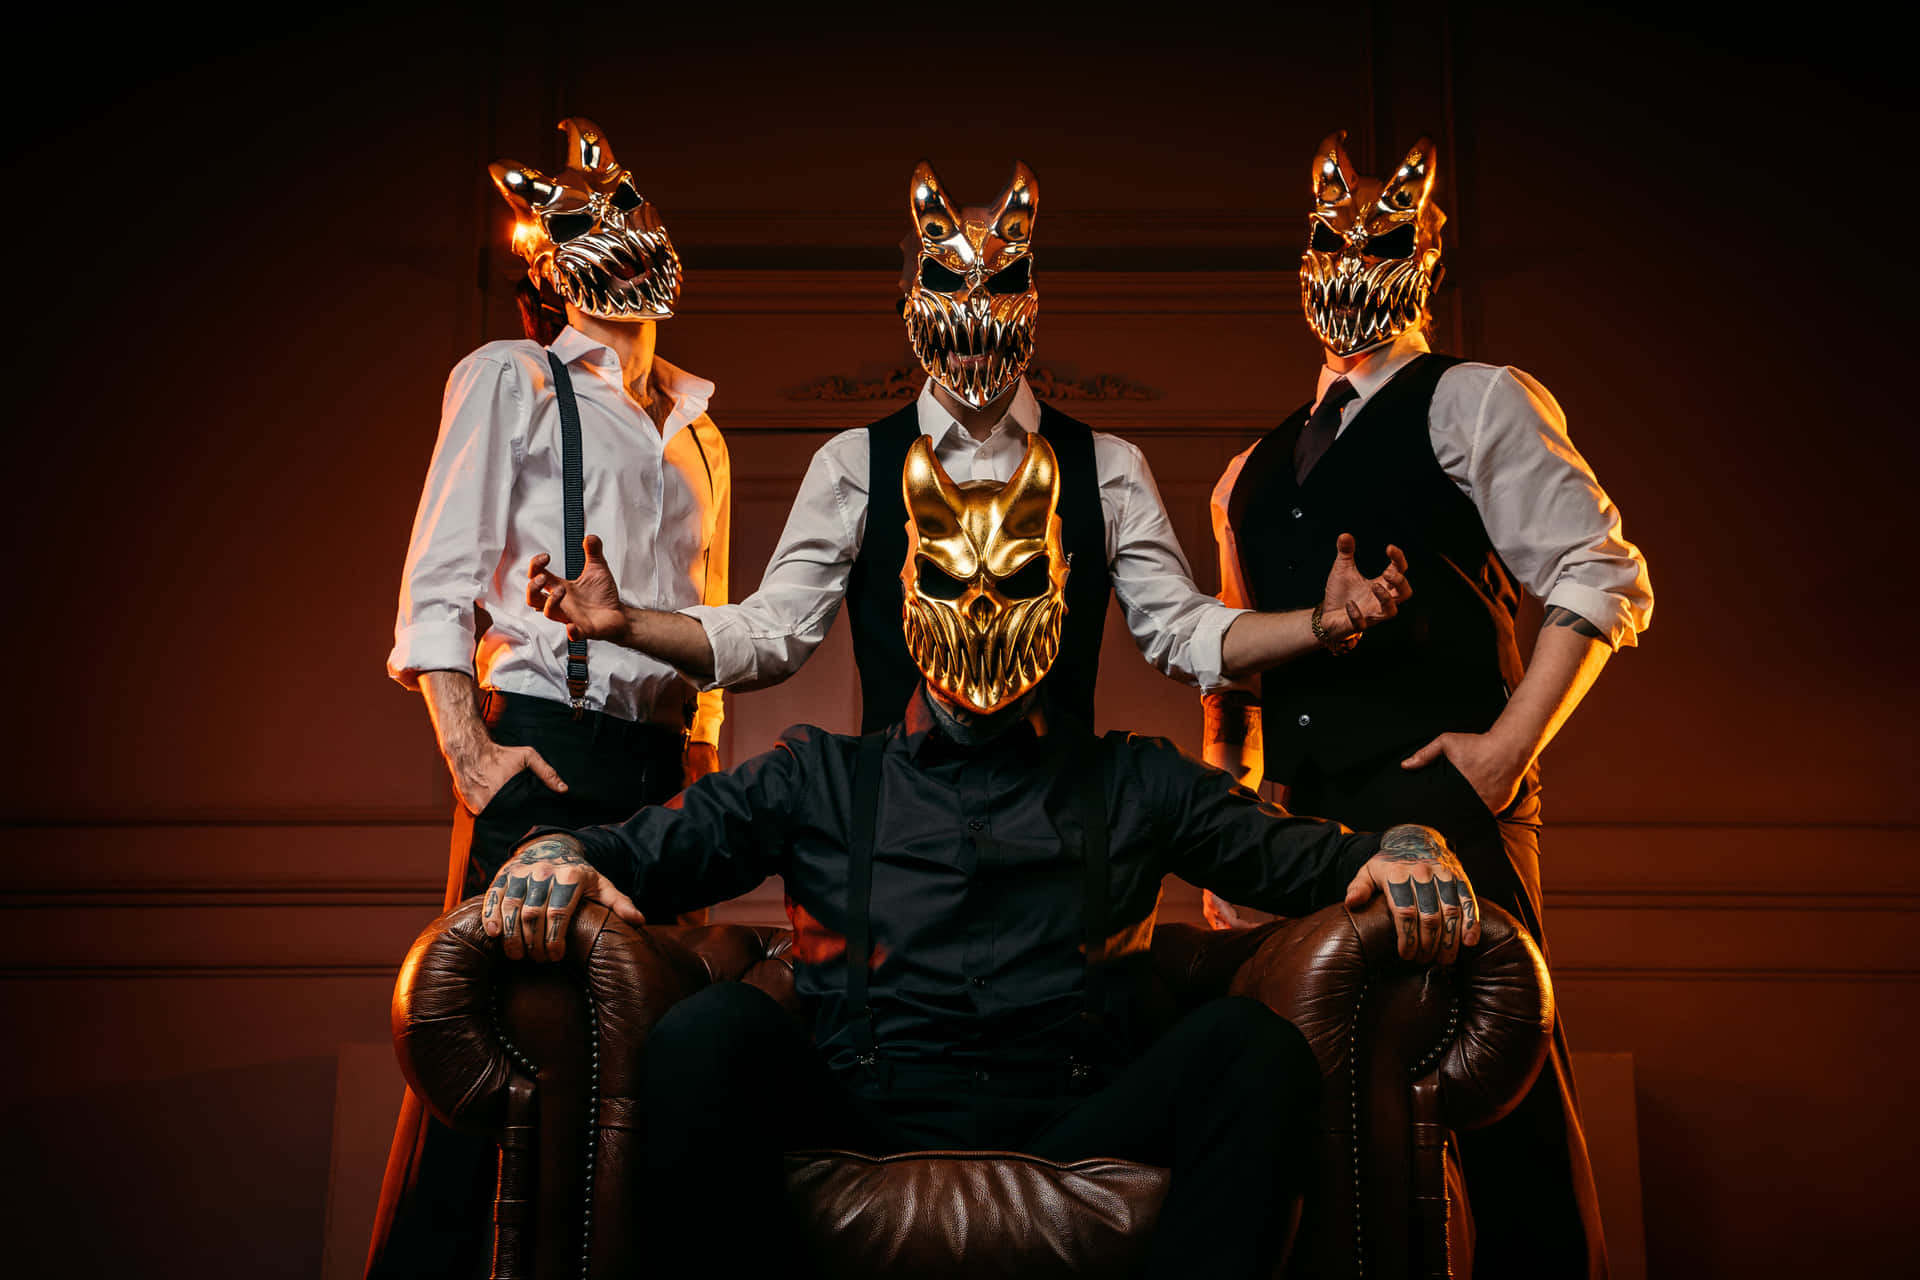 Masked_ Trio_ With_ Golden_ Leader Wallpaper